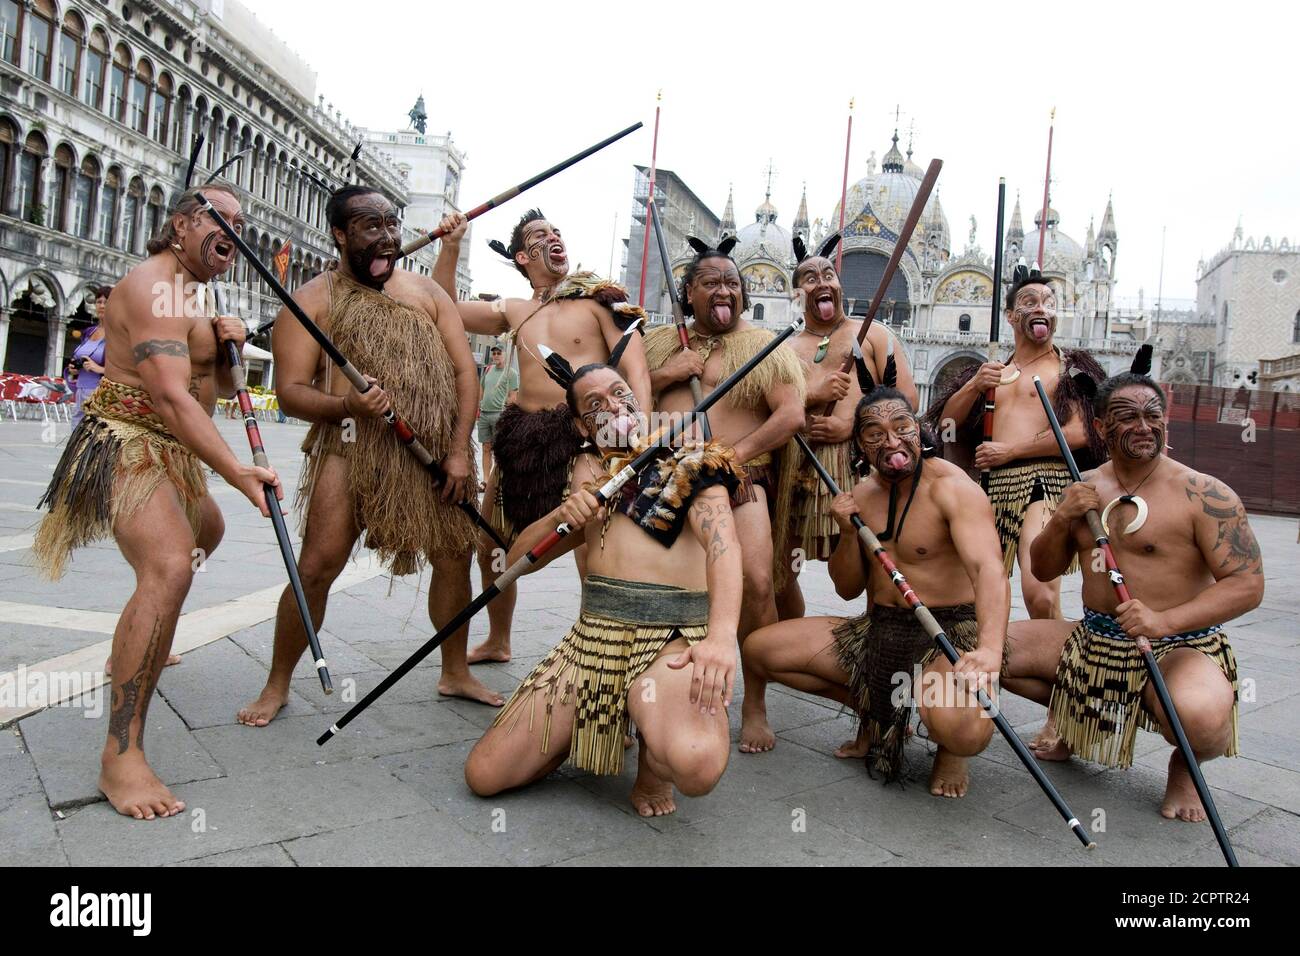 Members of traditional Maori group 'Waka Huia' perform in San Marco square, as part of the opening of the New Zealand pavilion at the Venice Biennale June 3, 2009. The Biennale, one of the world's major art festivals traditionally held every two years dating back to 1895, is open to the public June 7 - November 22, 2009. REUTERS/Tony Gentile  (ITALY SOCIETY) Stock Photo